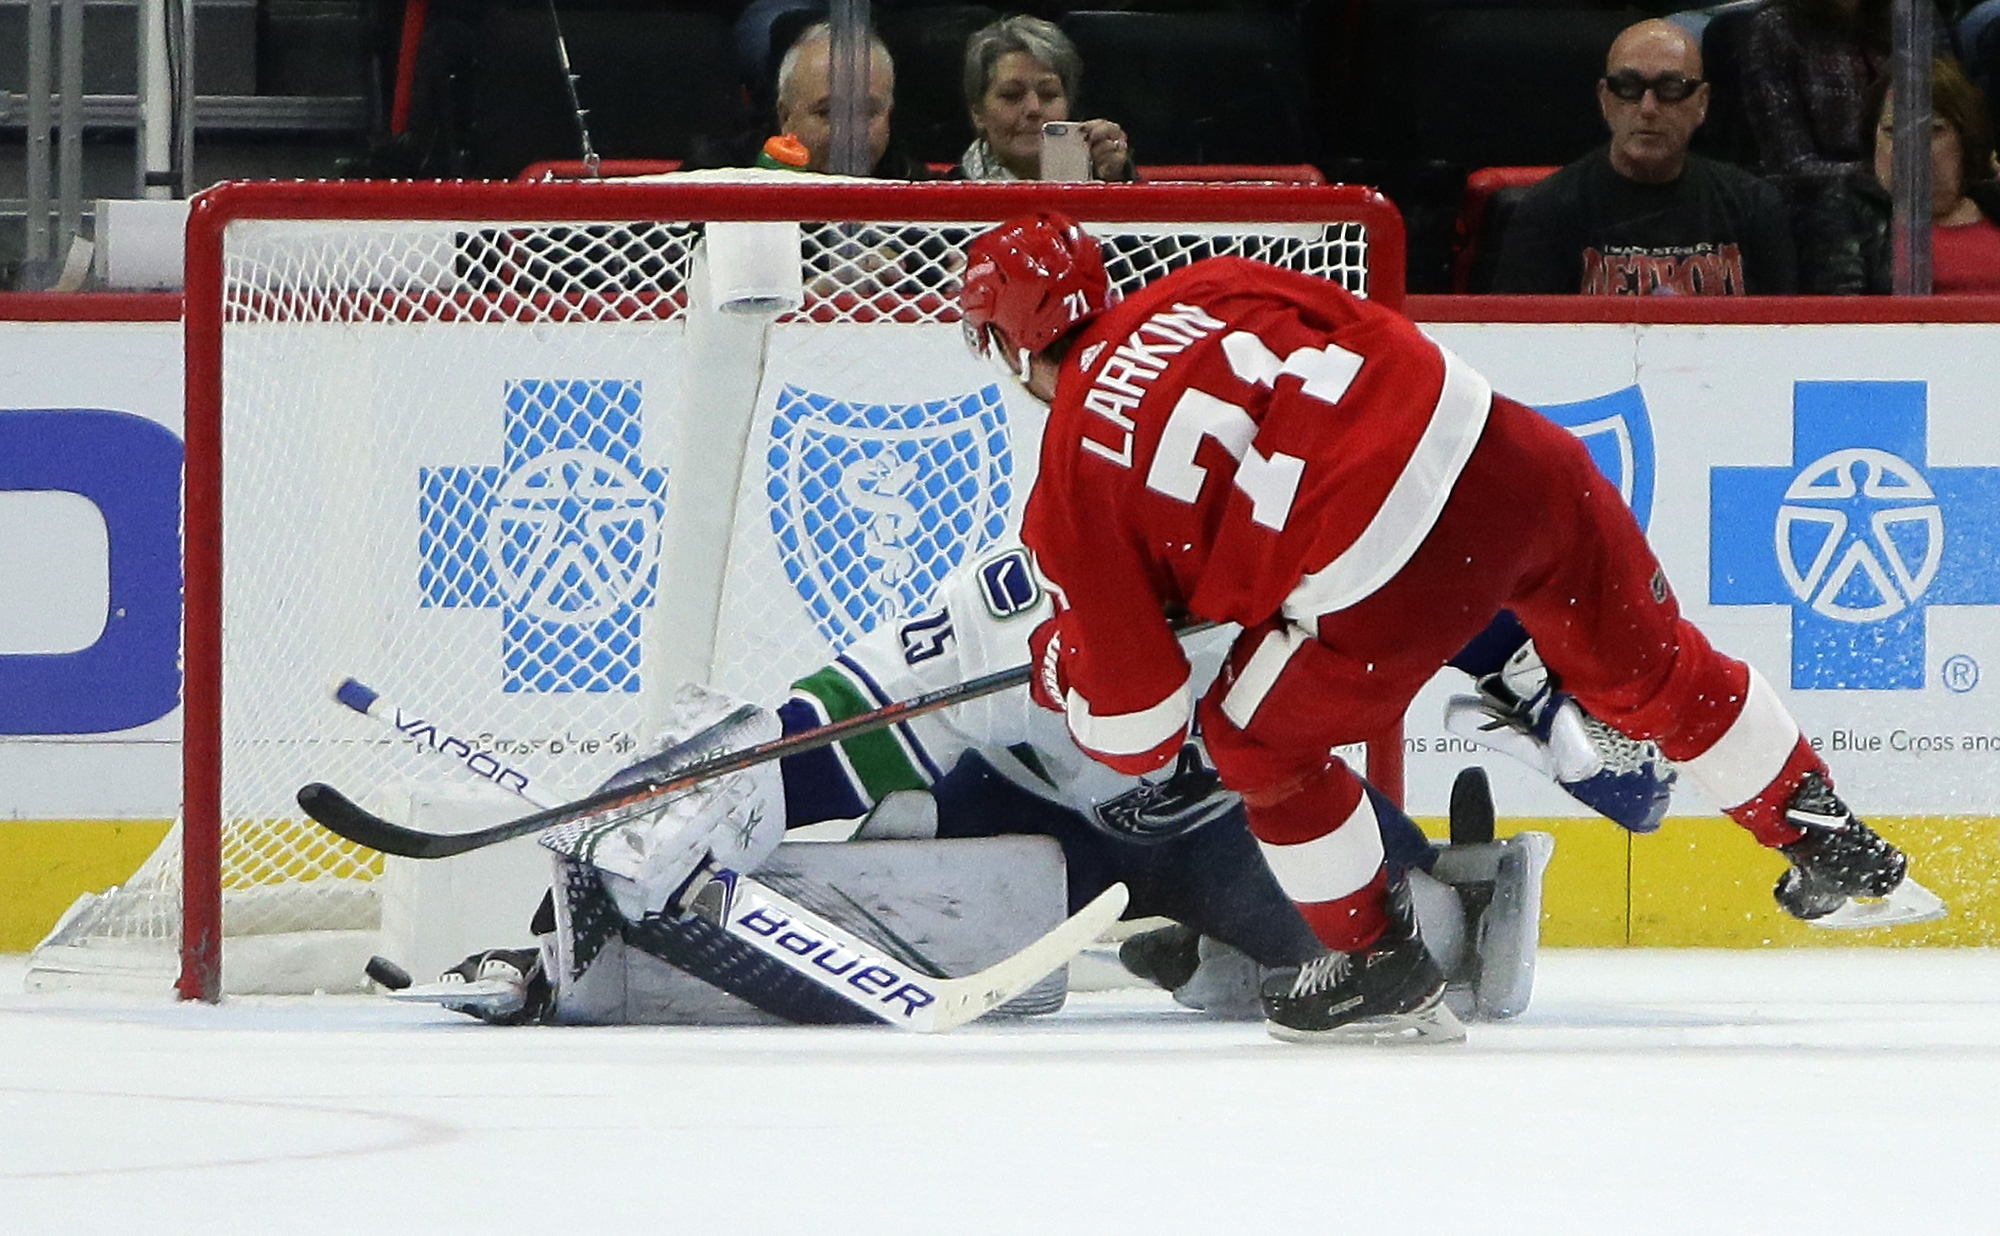 Larkin’s shootout goal gives Red Wings 3-2 win over Canucks